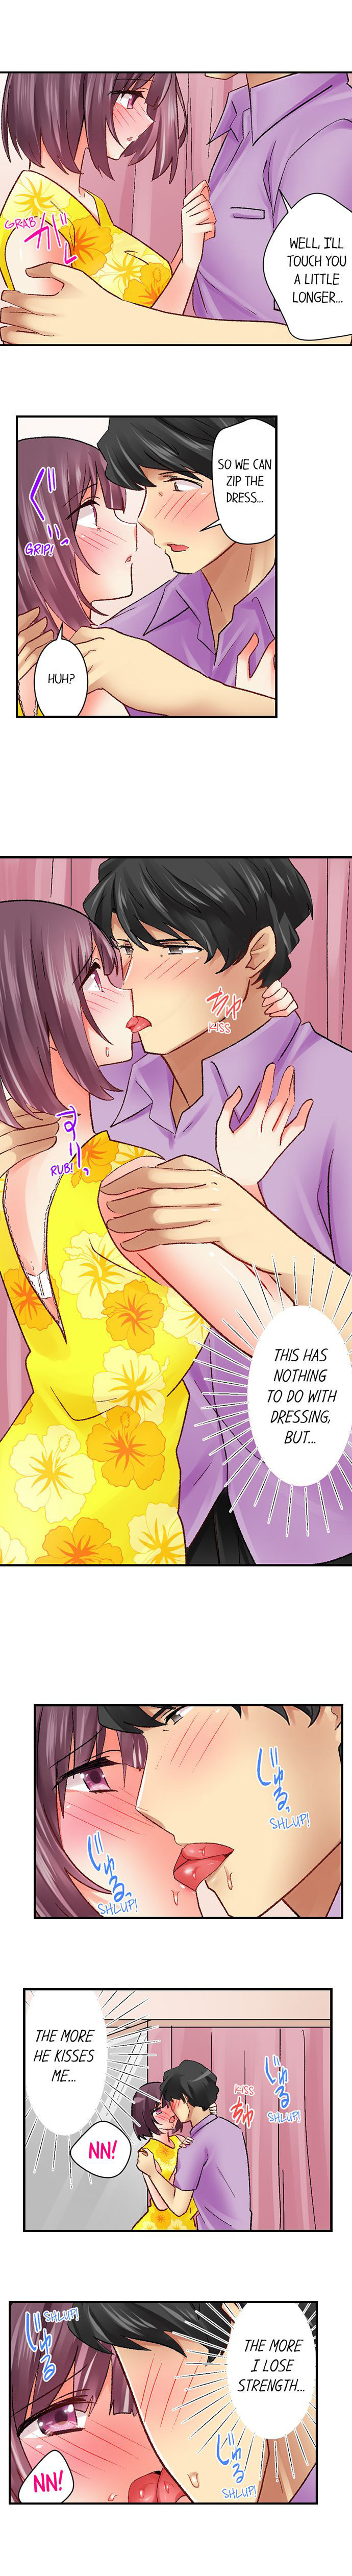 Our Kinky Newlywed Life - Chapter 49 Page 8